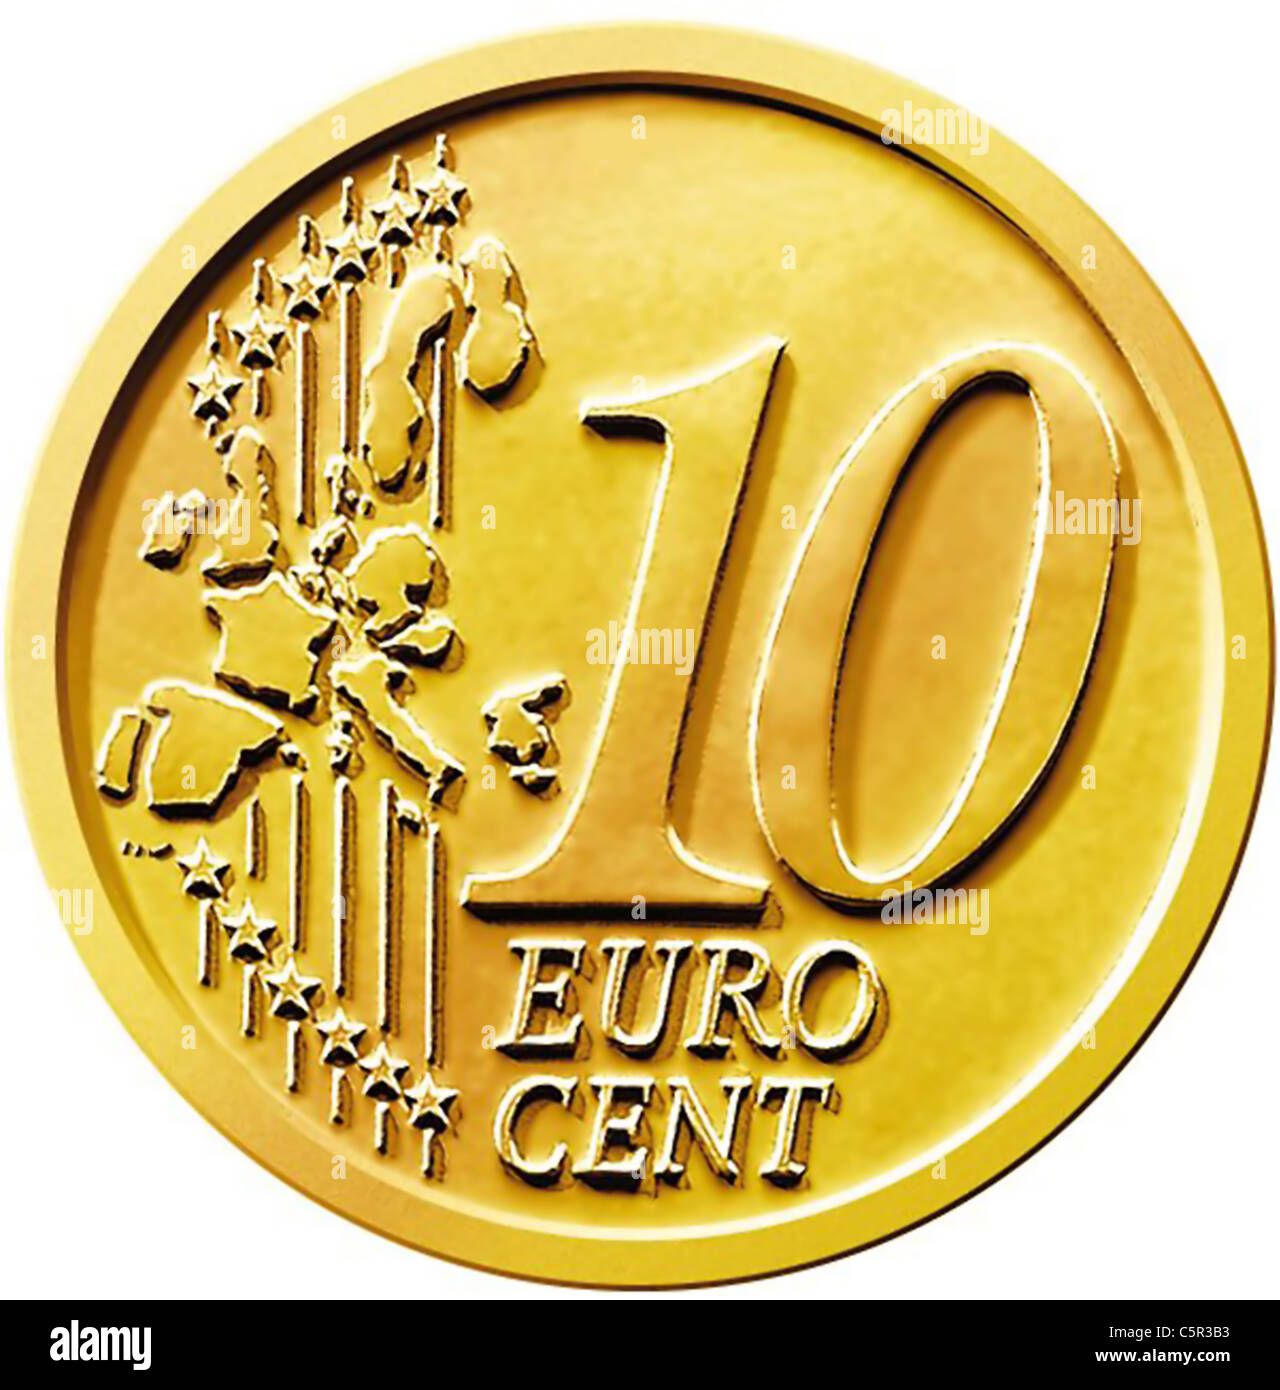 Illustration of a ten (10) cent euro coin isolated on a white ...